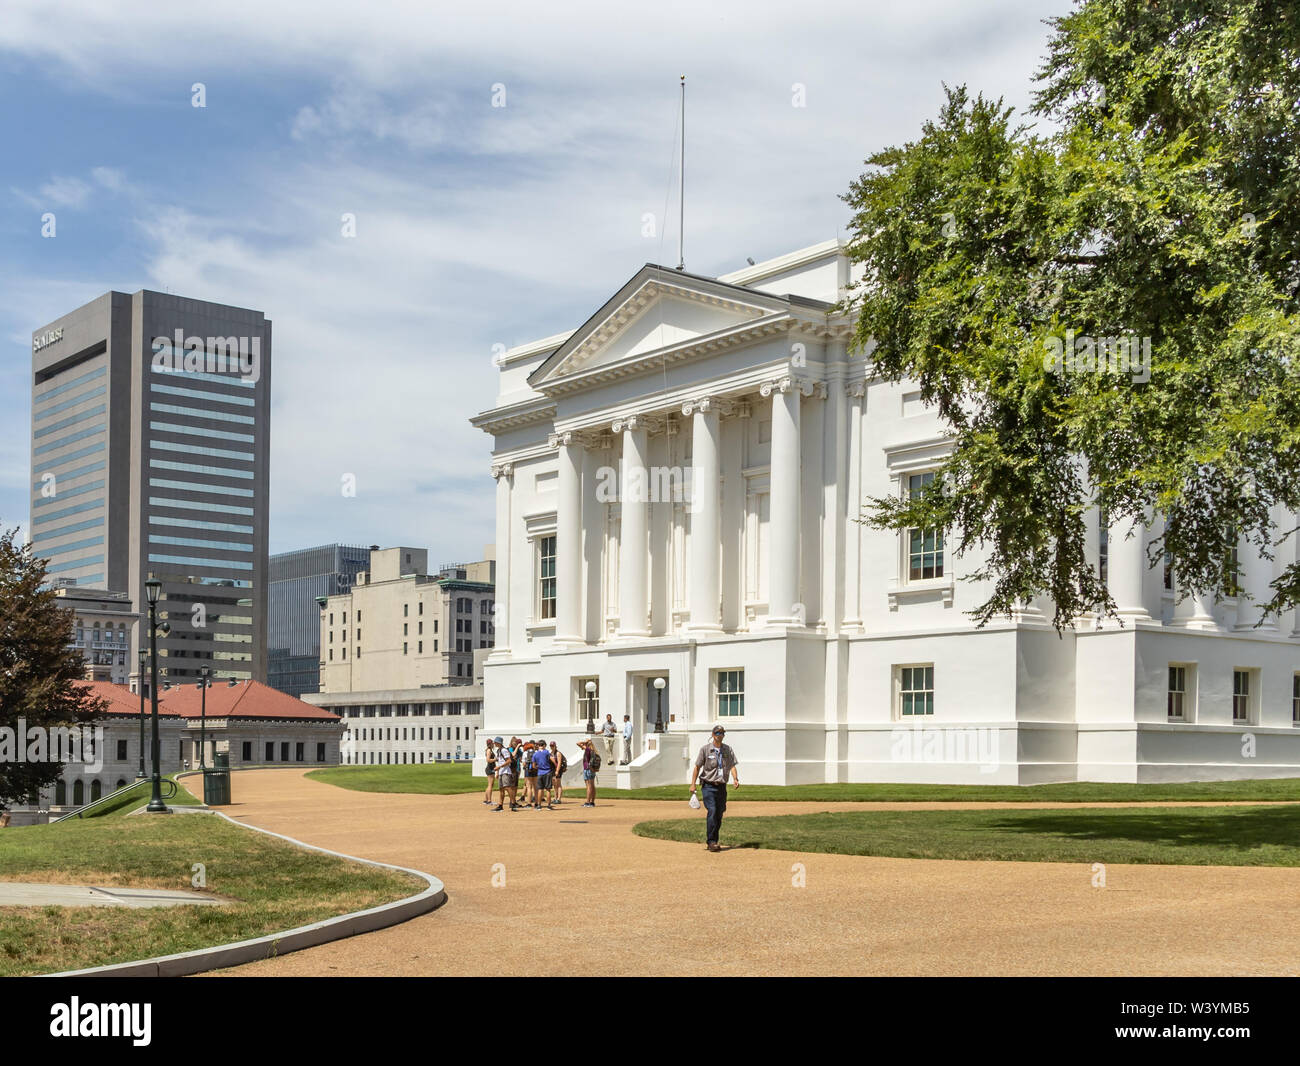 VIRGINA STATE CAPITOL, RICHMOND, VA - CIRCA 2019. The Capitol was designed by Thomas Jefferson and first occupied in 1788 by Virginia's General Assemb Stock Photo